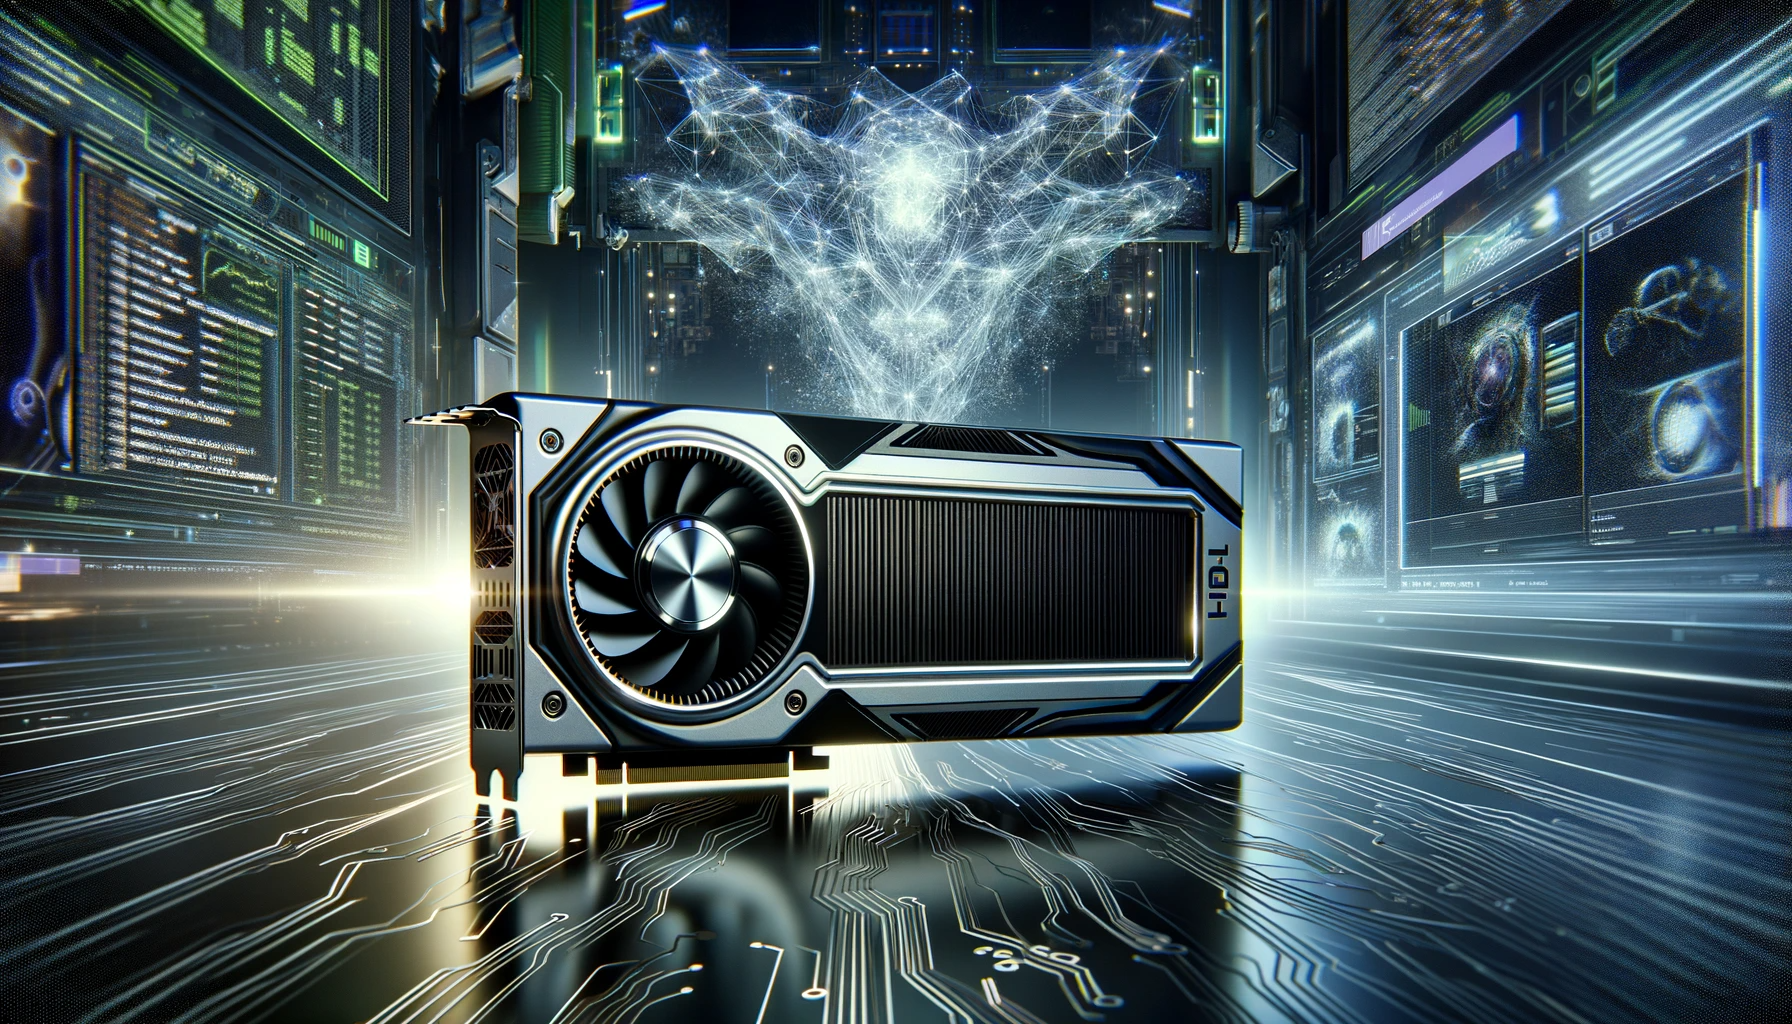 Nvidia unveils the H200, a formidable GPU powerhouse designed to accelerate ChatGPT through AI processing.